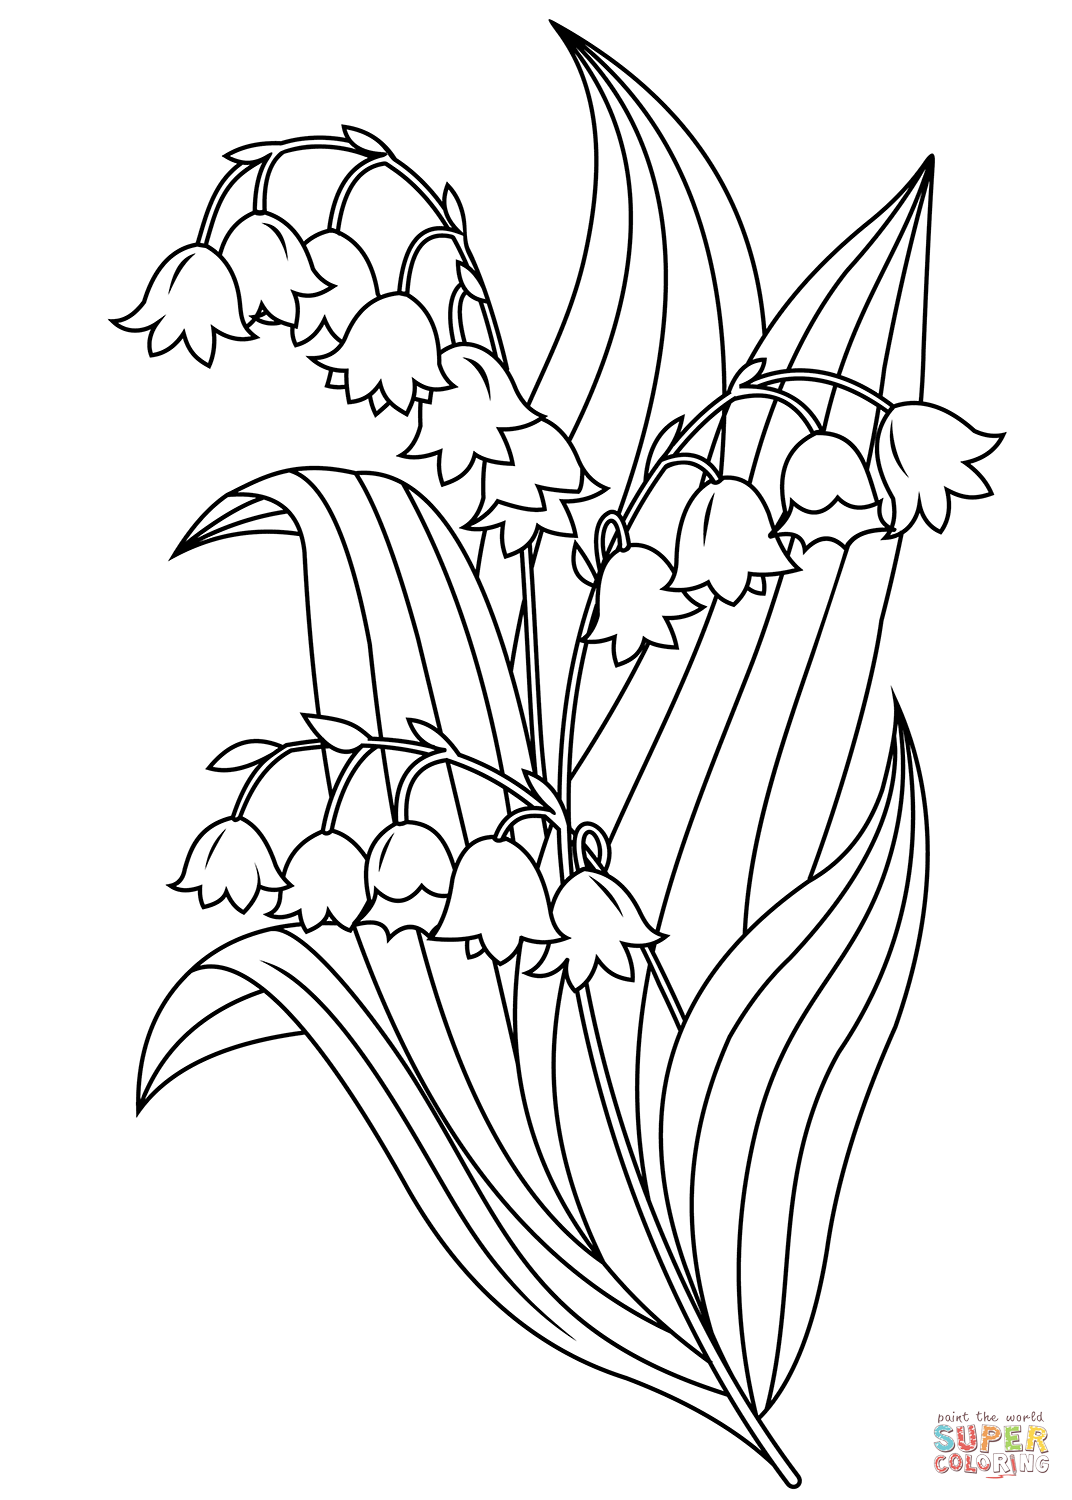 Lily of the valley coloring page free printable coloring pages